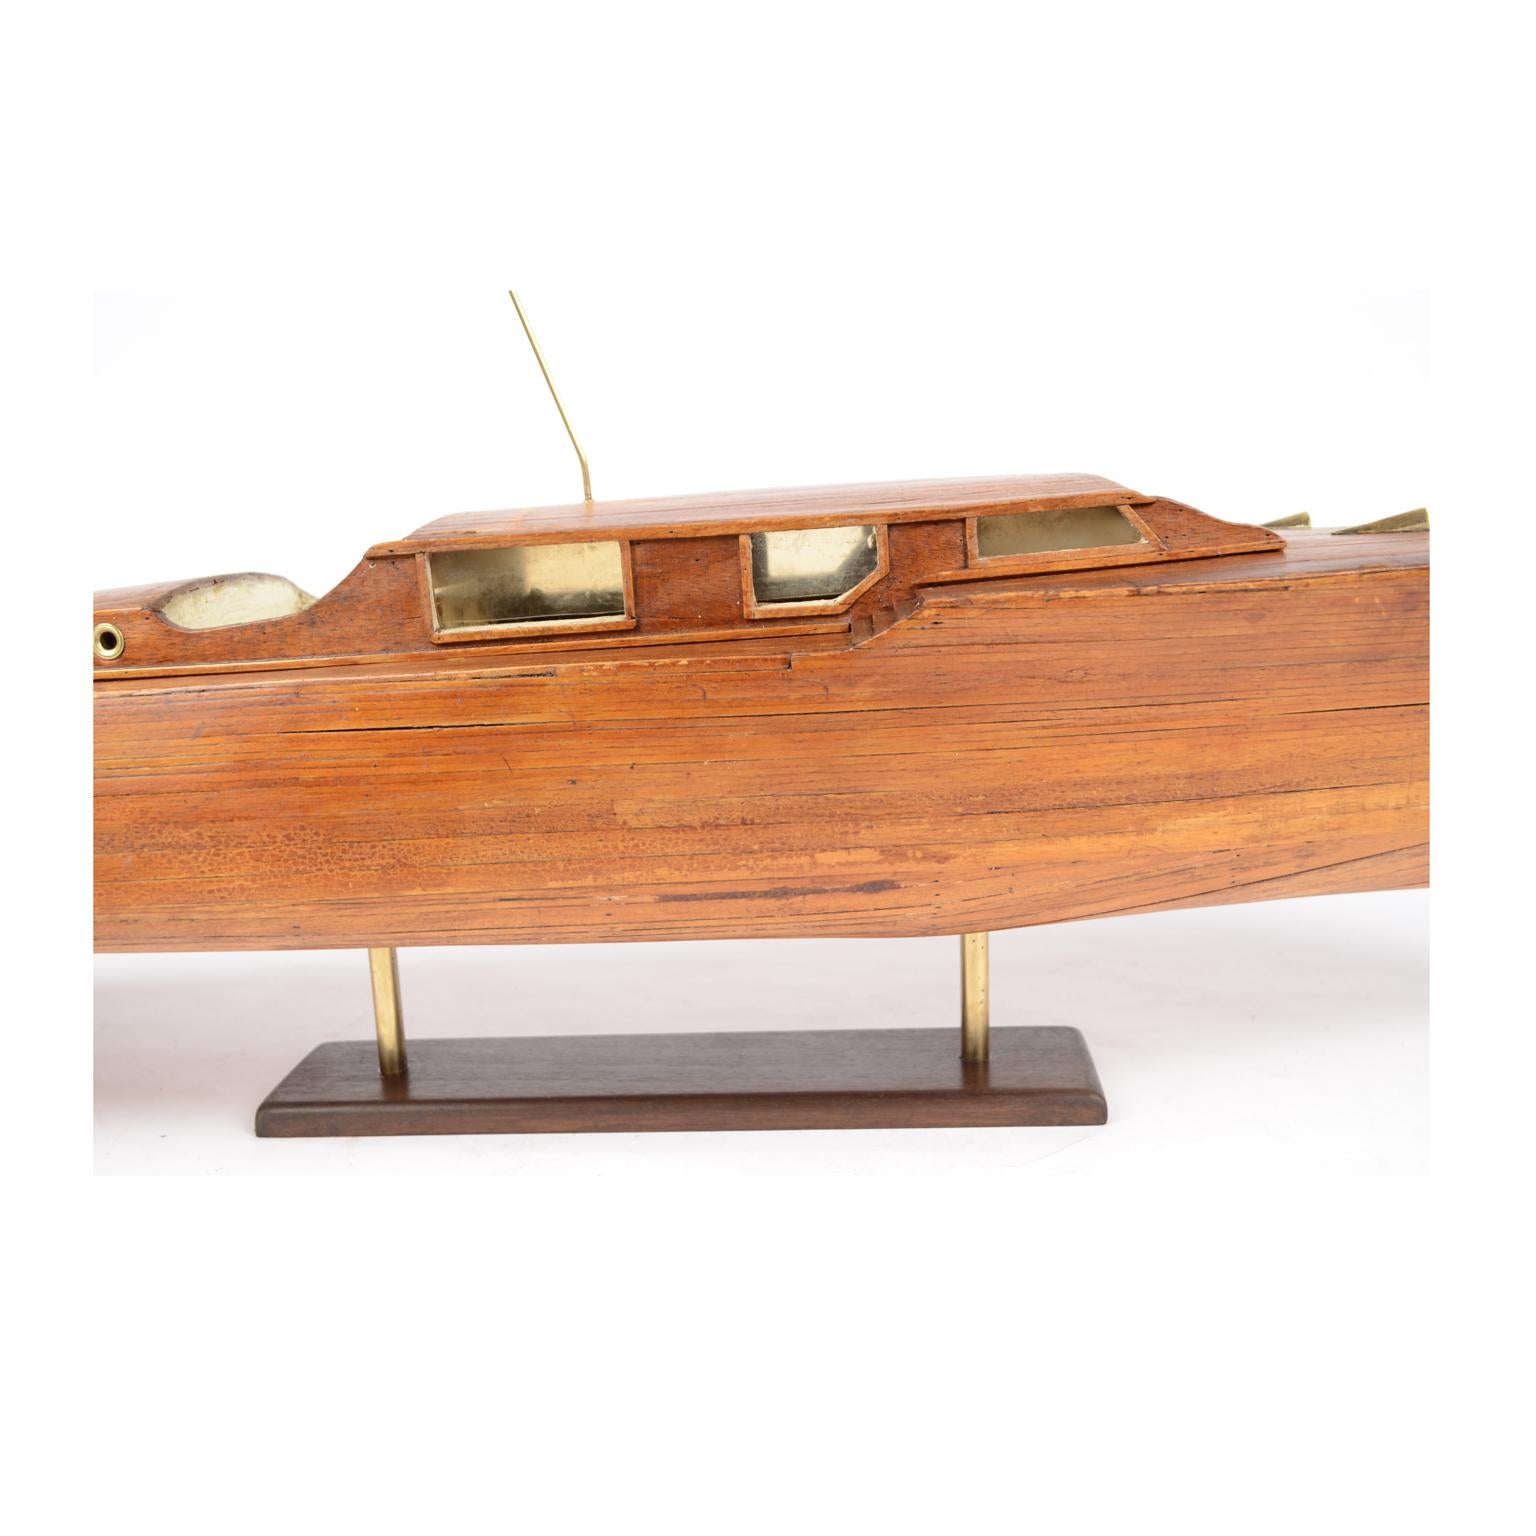 Scale Model of an English Motor Yacht from the 1930s 9